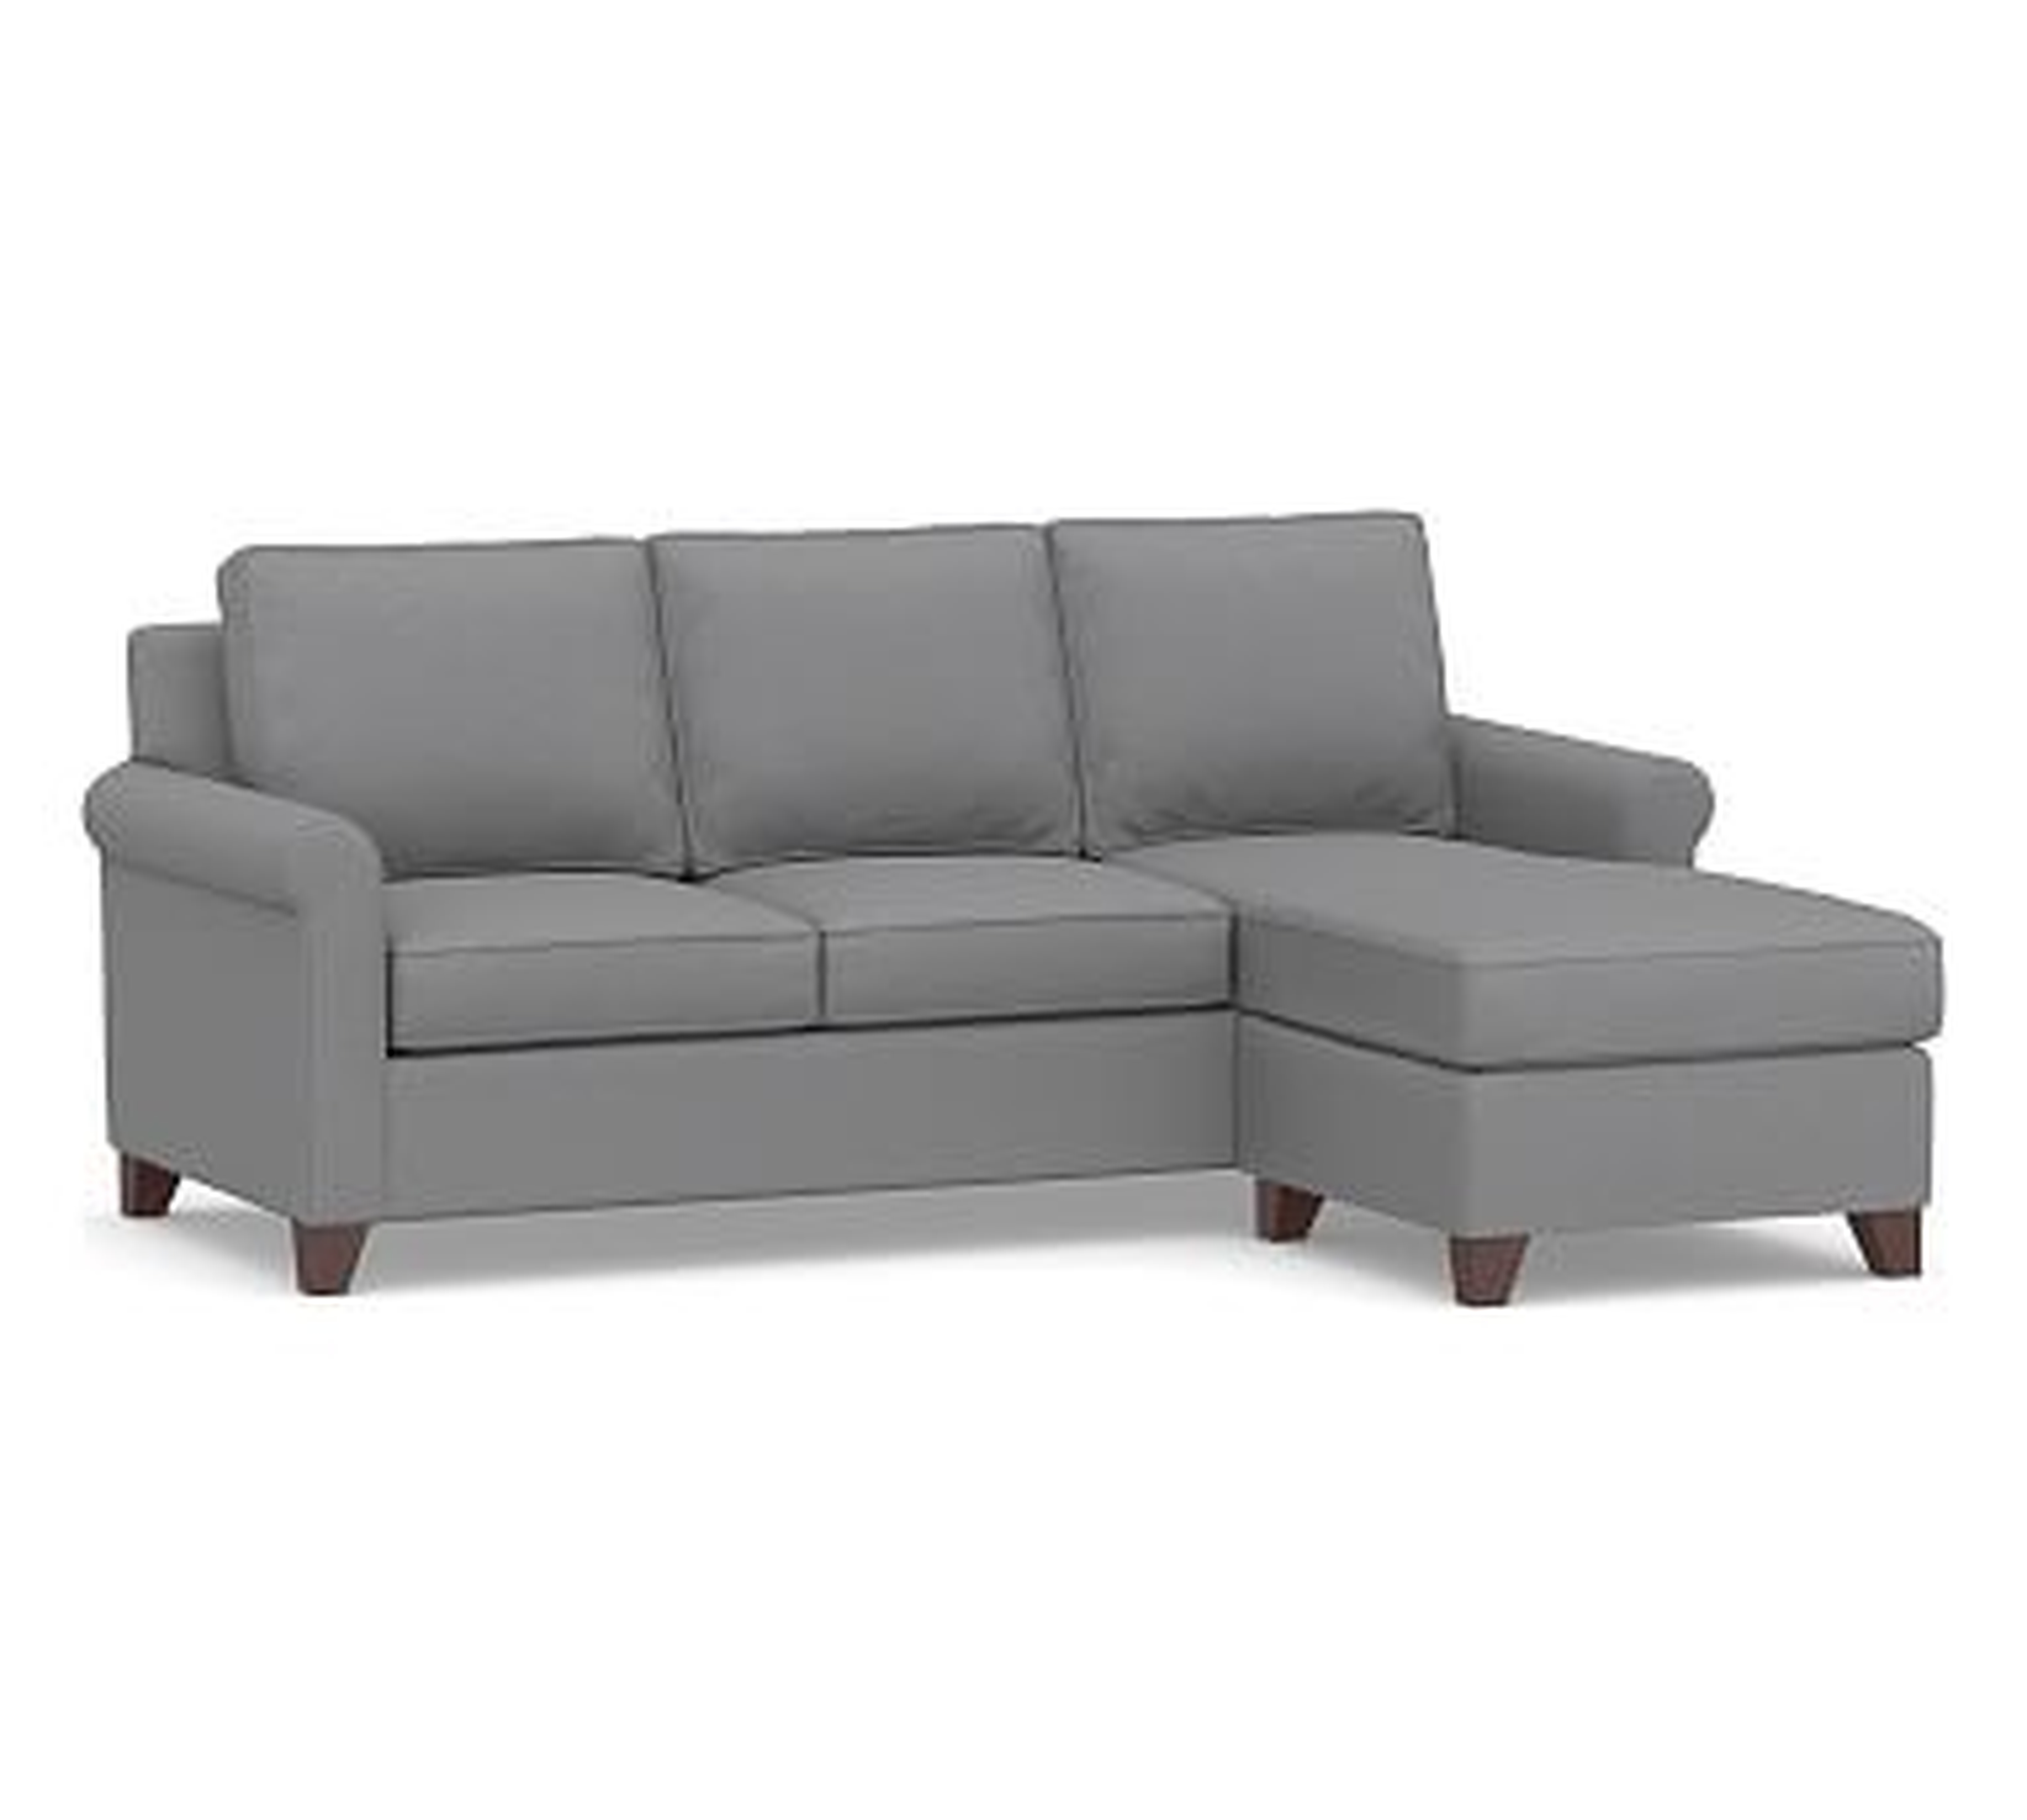 Cameron Roll Arm Upholstered Sofa with Reversible Chaise Sectional, Polyester Wrapped Cushions, Textured Twill Light Gray - Pottery Barn